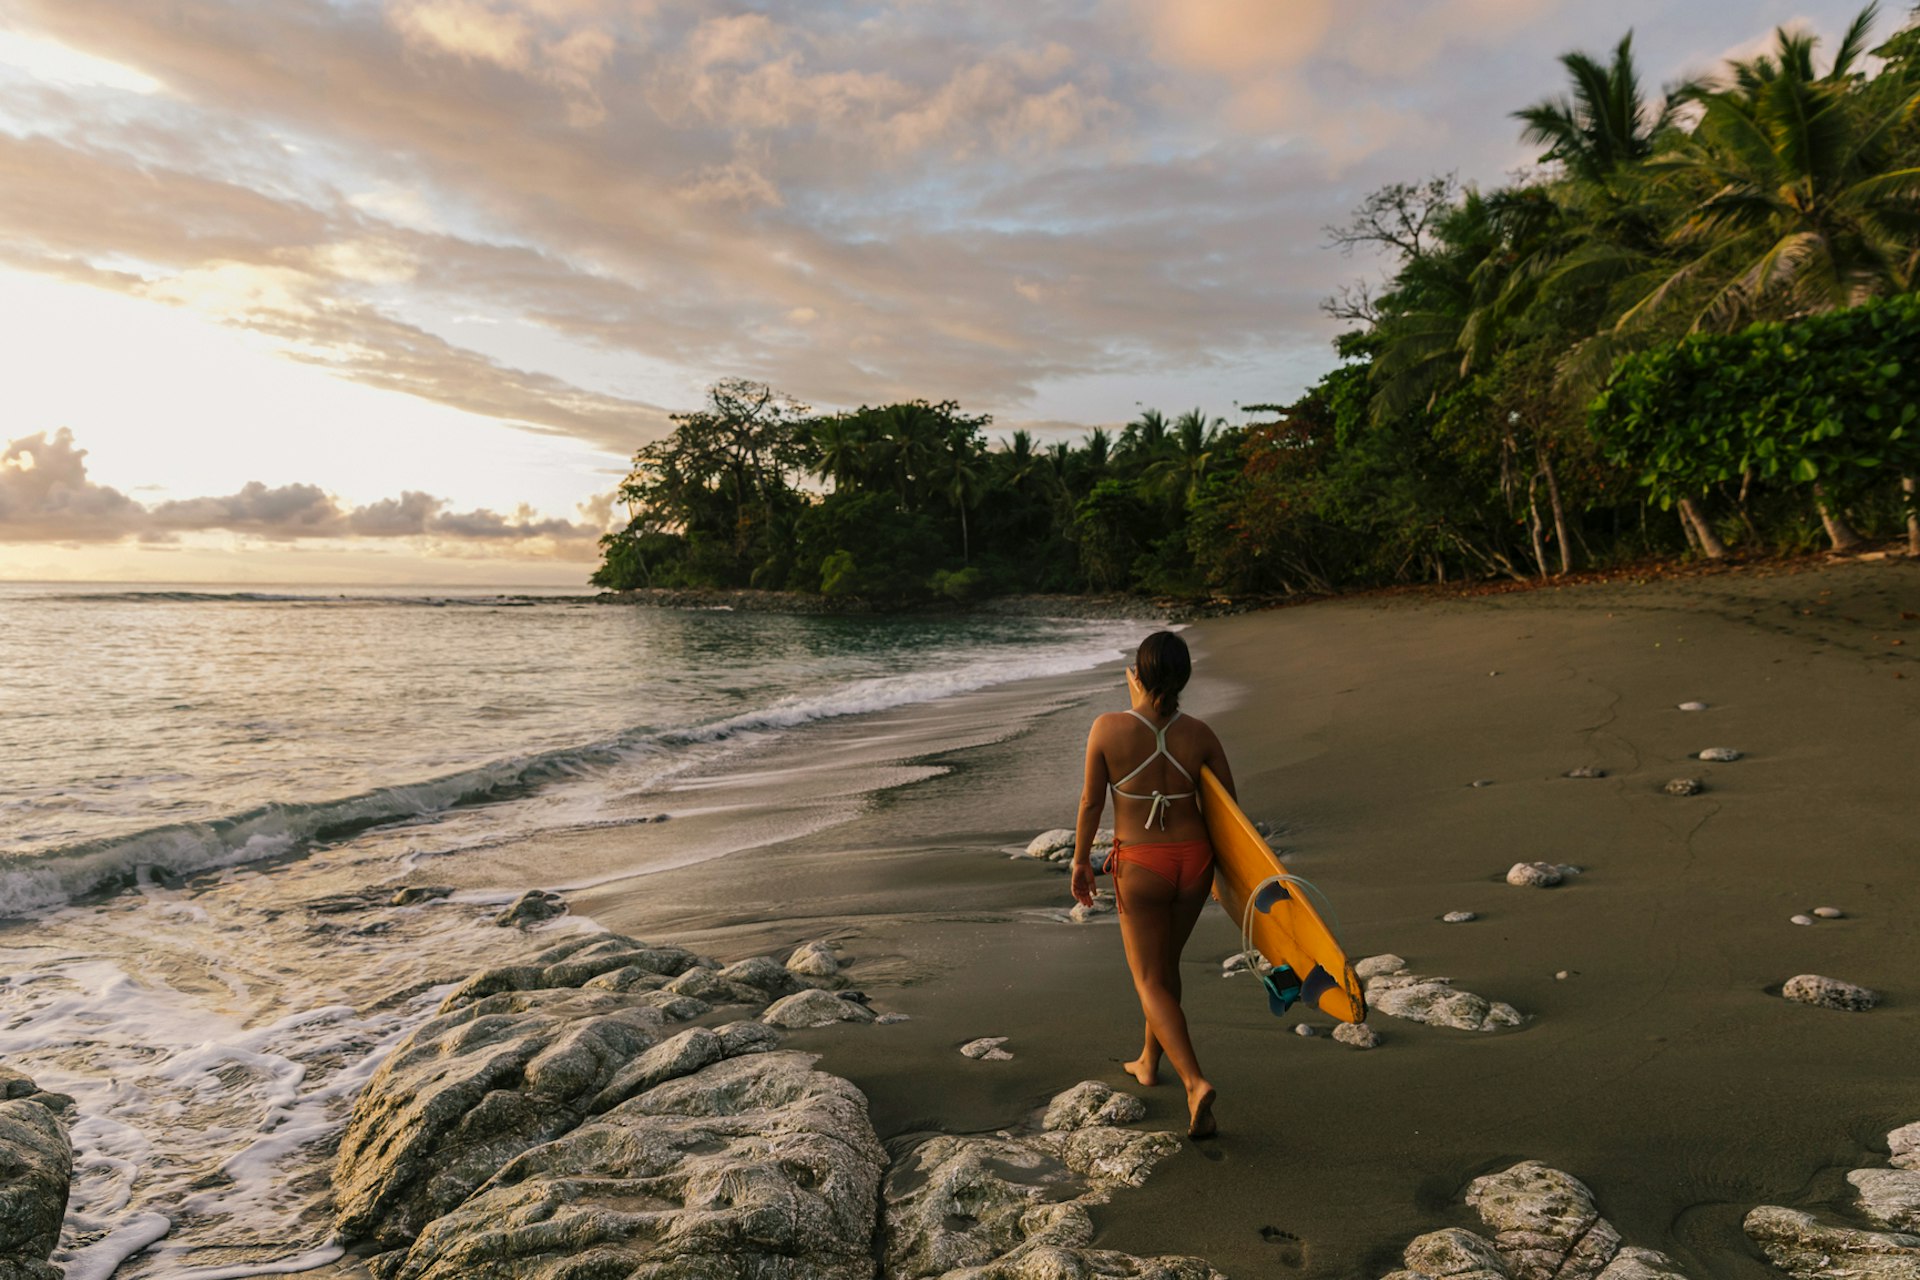 A female surfer holding her surf board walks on a beach in Costa Rica